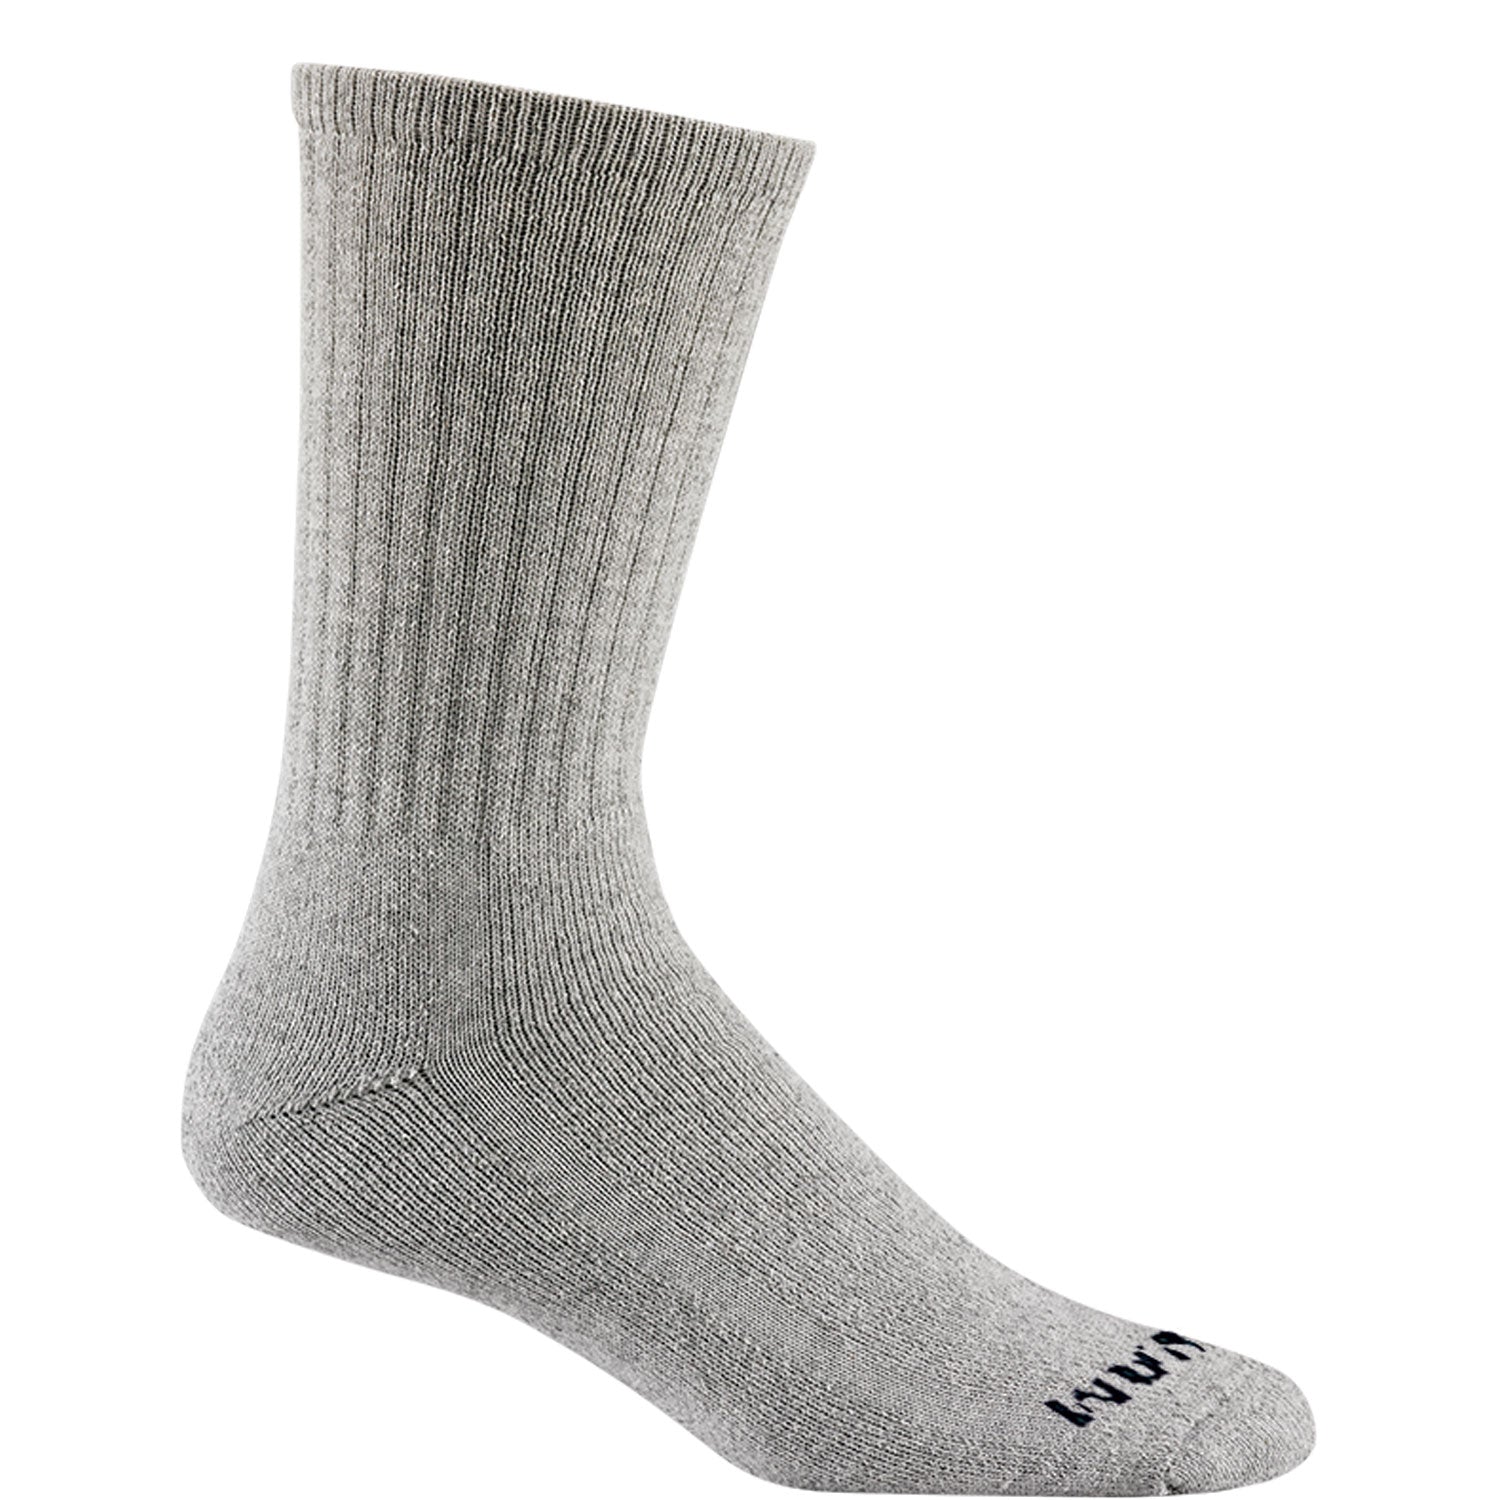 Super 60® Crew 3-Pack Midweight Cotton Socks - Grey full product perspective - made in The USA Wigwam Socks